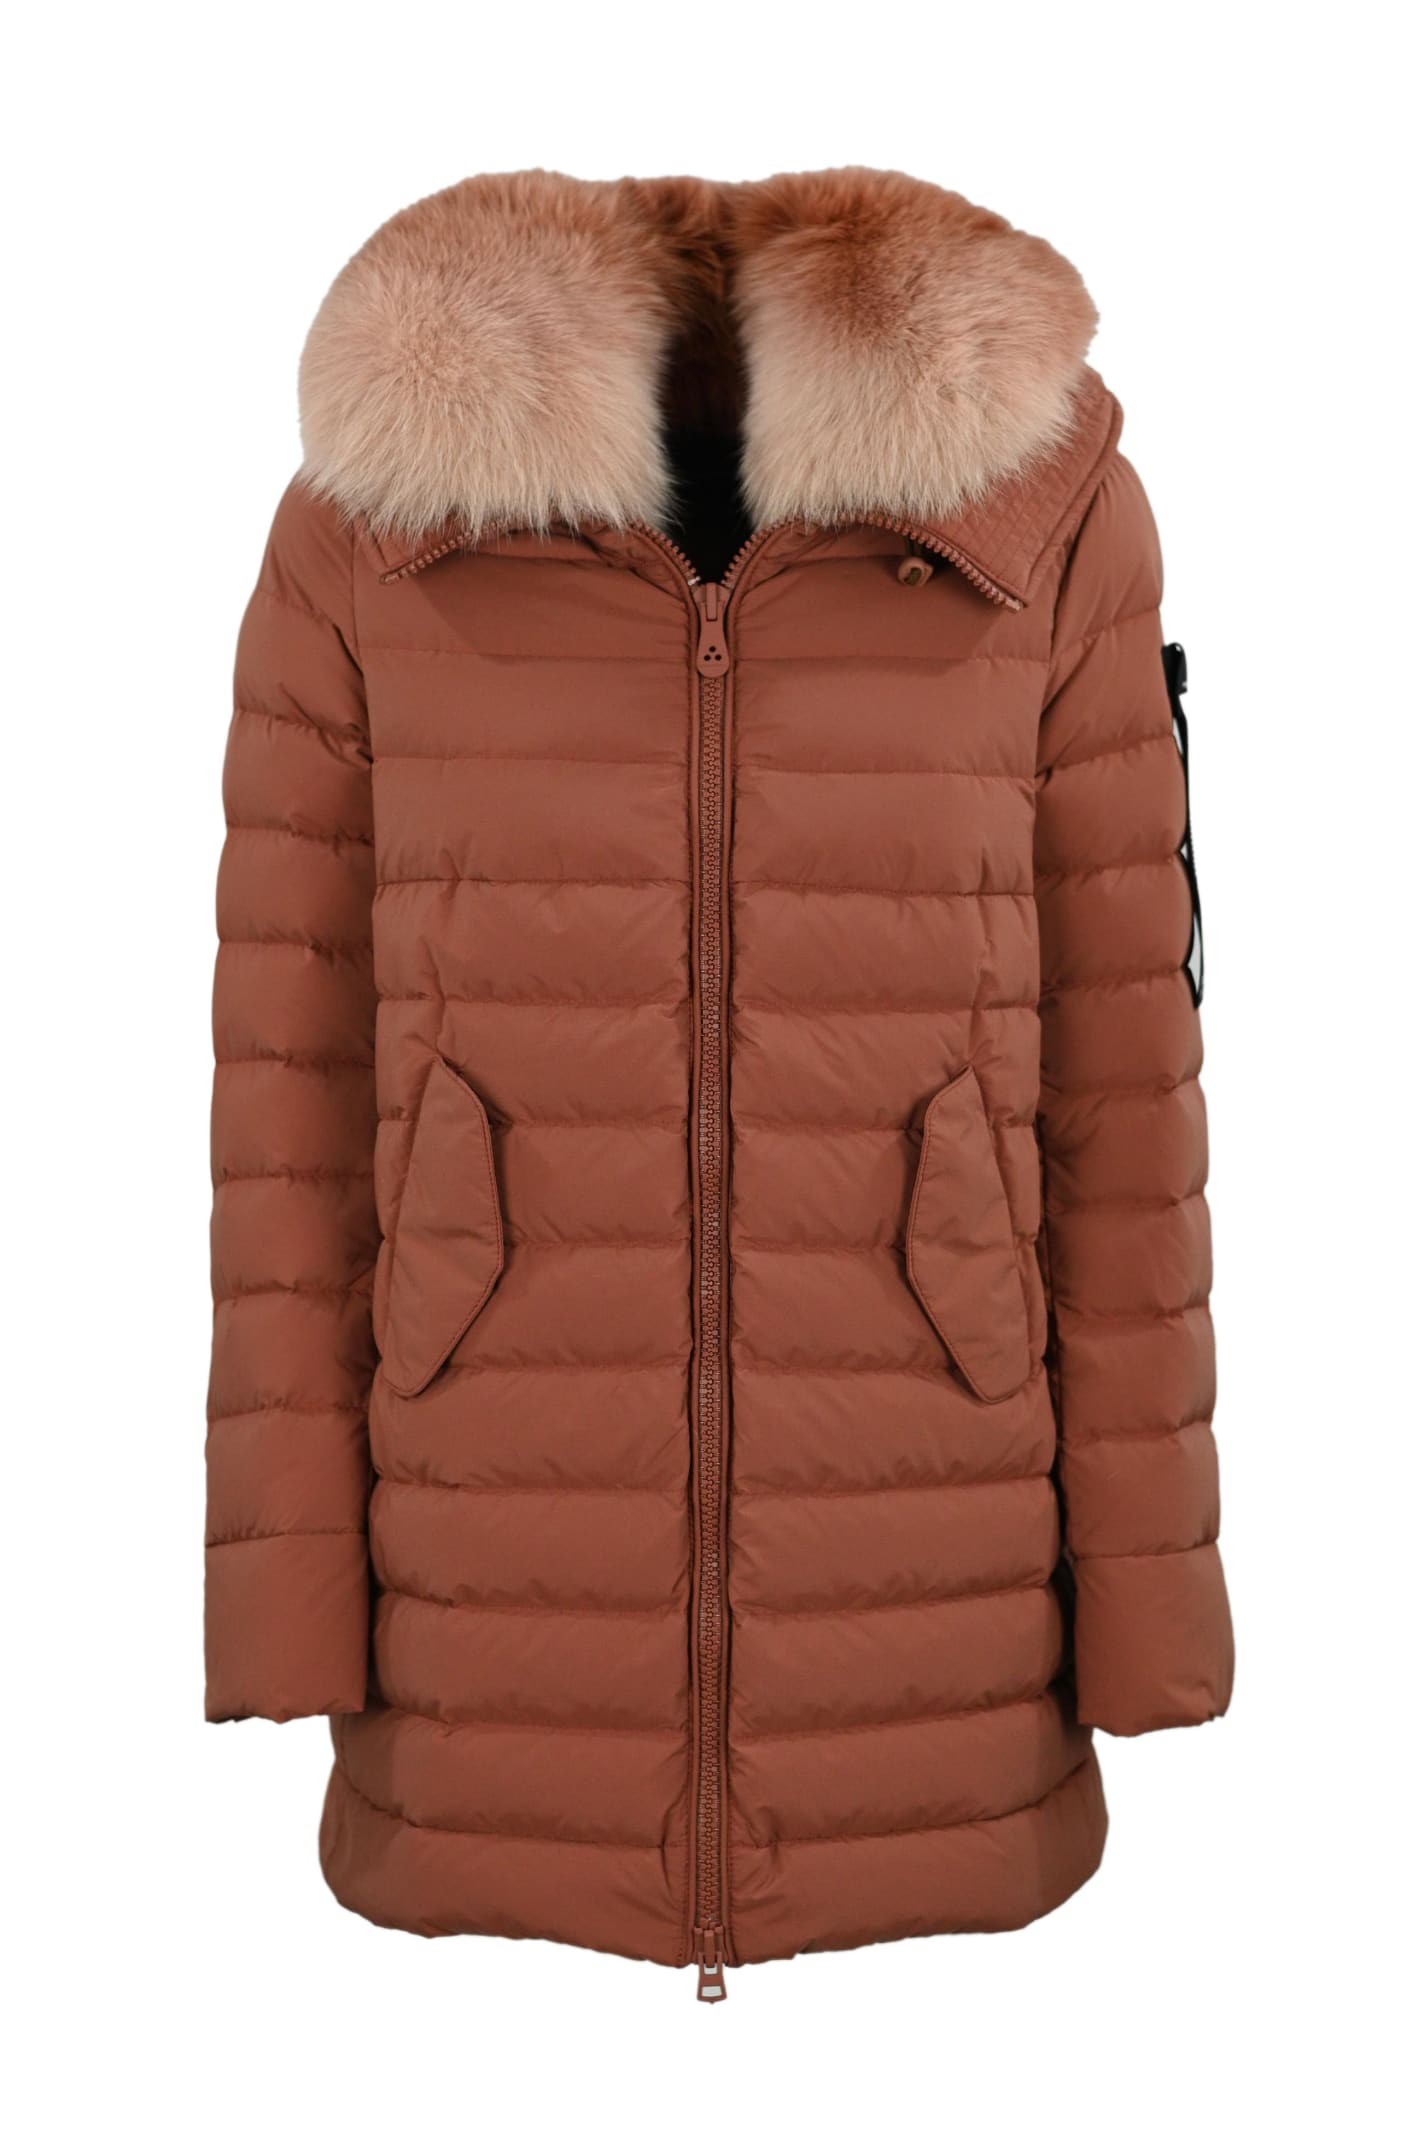 Peuterey Long Down Jacket With Fur In Color Tone